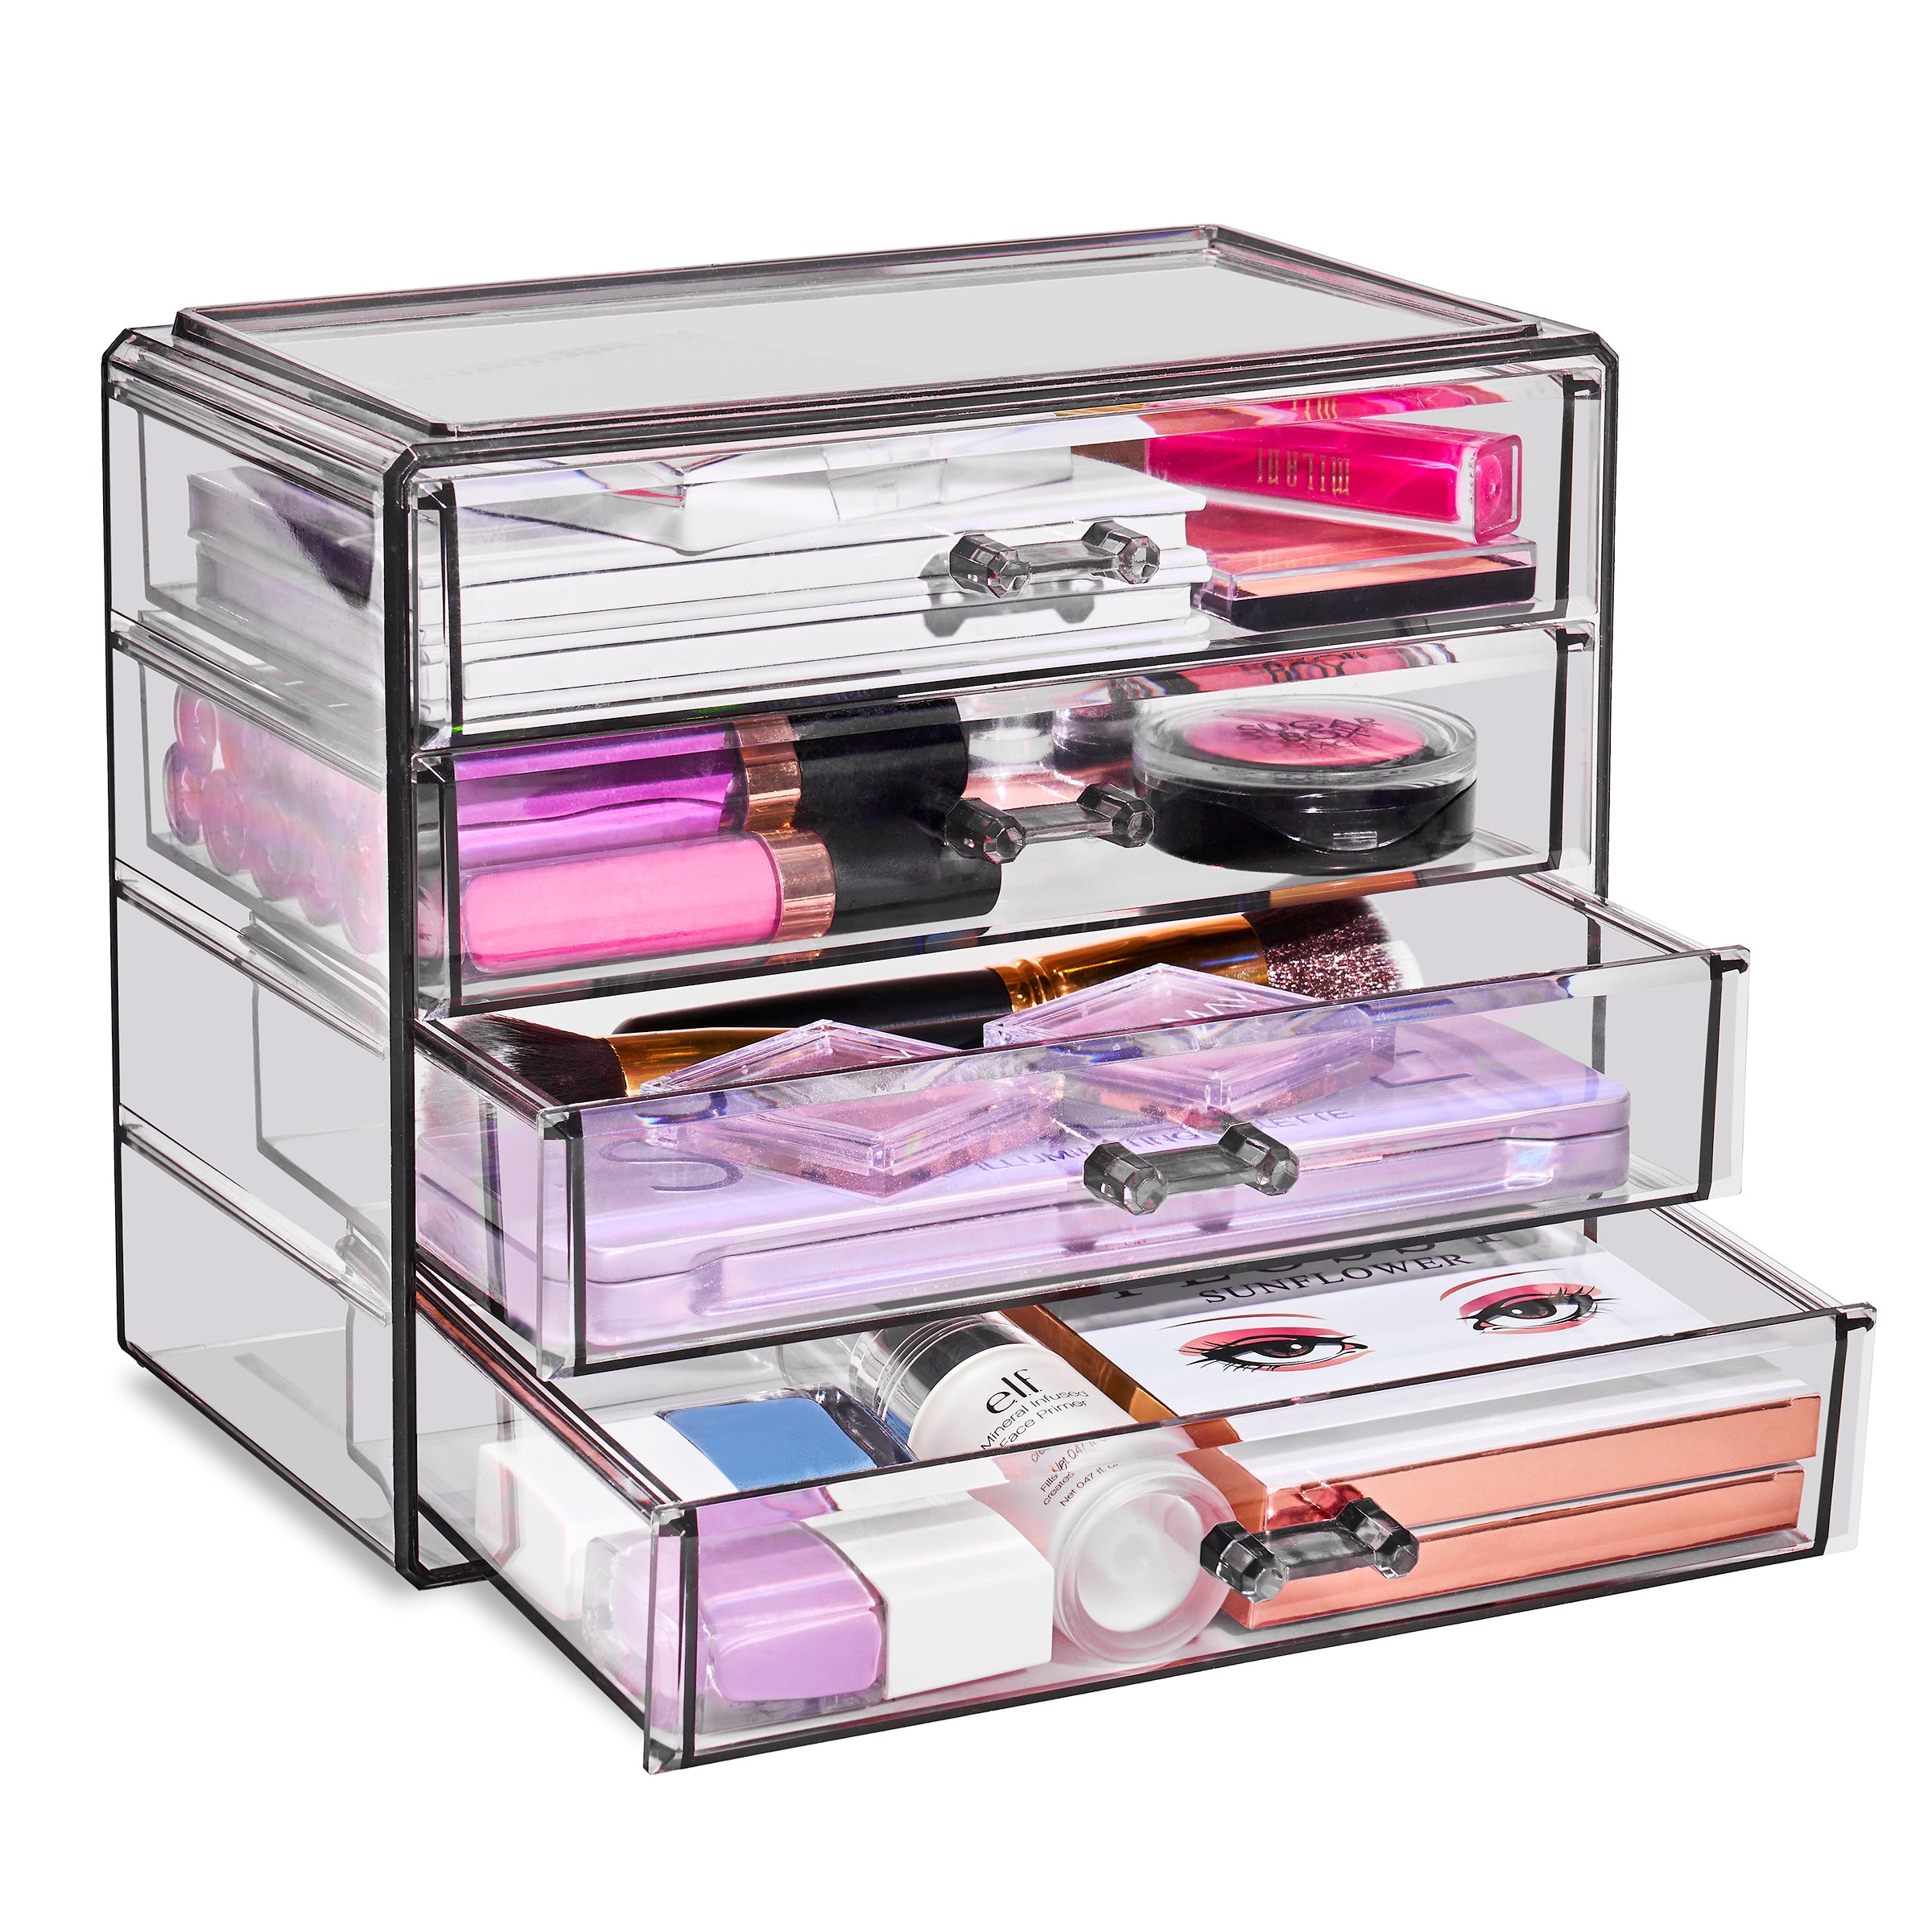 Makeup Storage Case (3 Large and 4 Small Drawers)